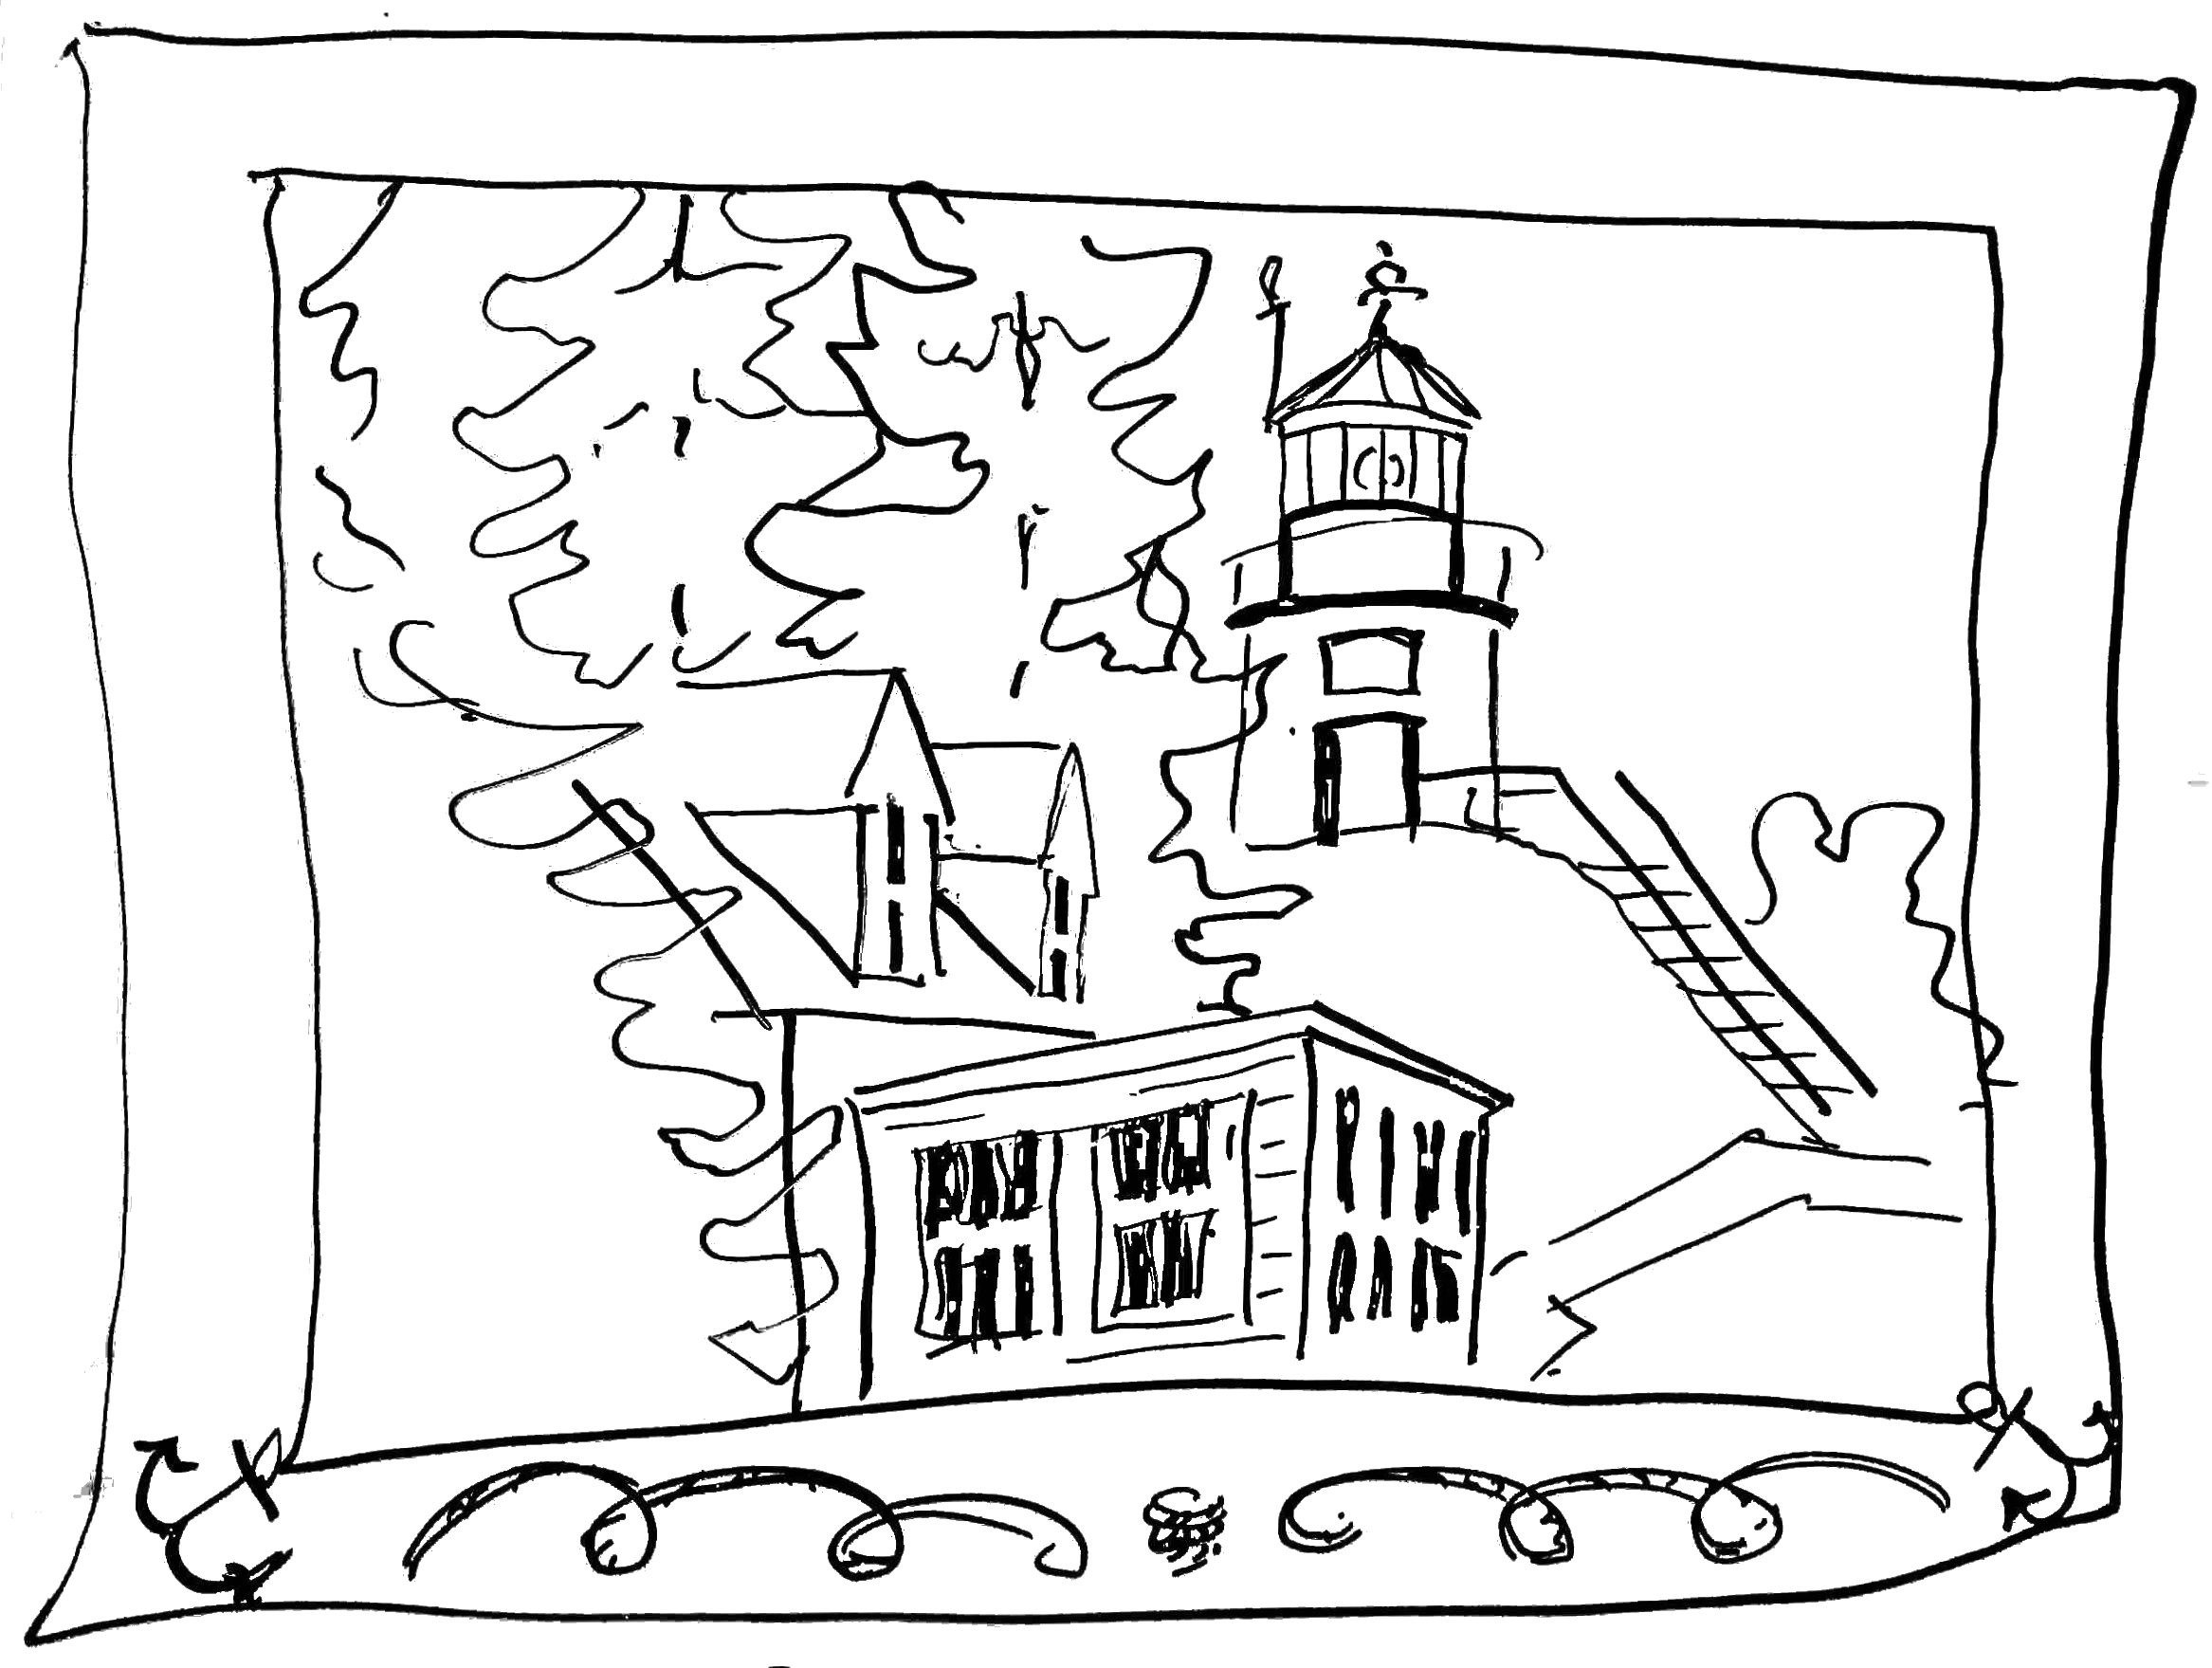 Owls Head Lighthouse coloring page demo drawing by Catinka Knoth